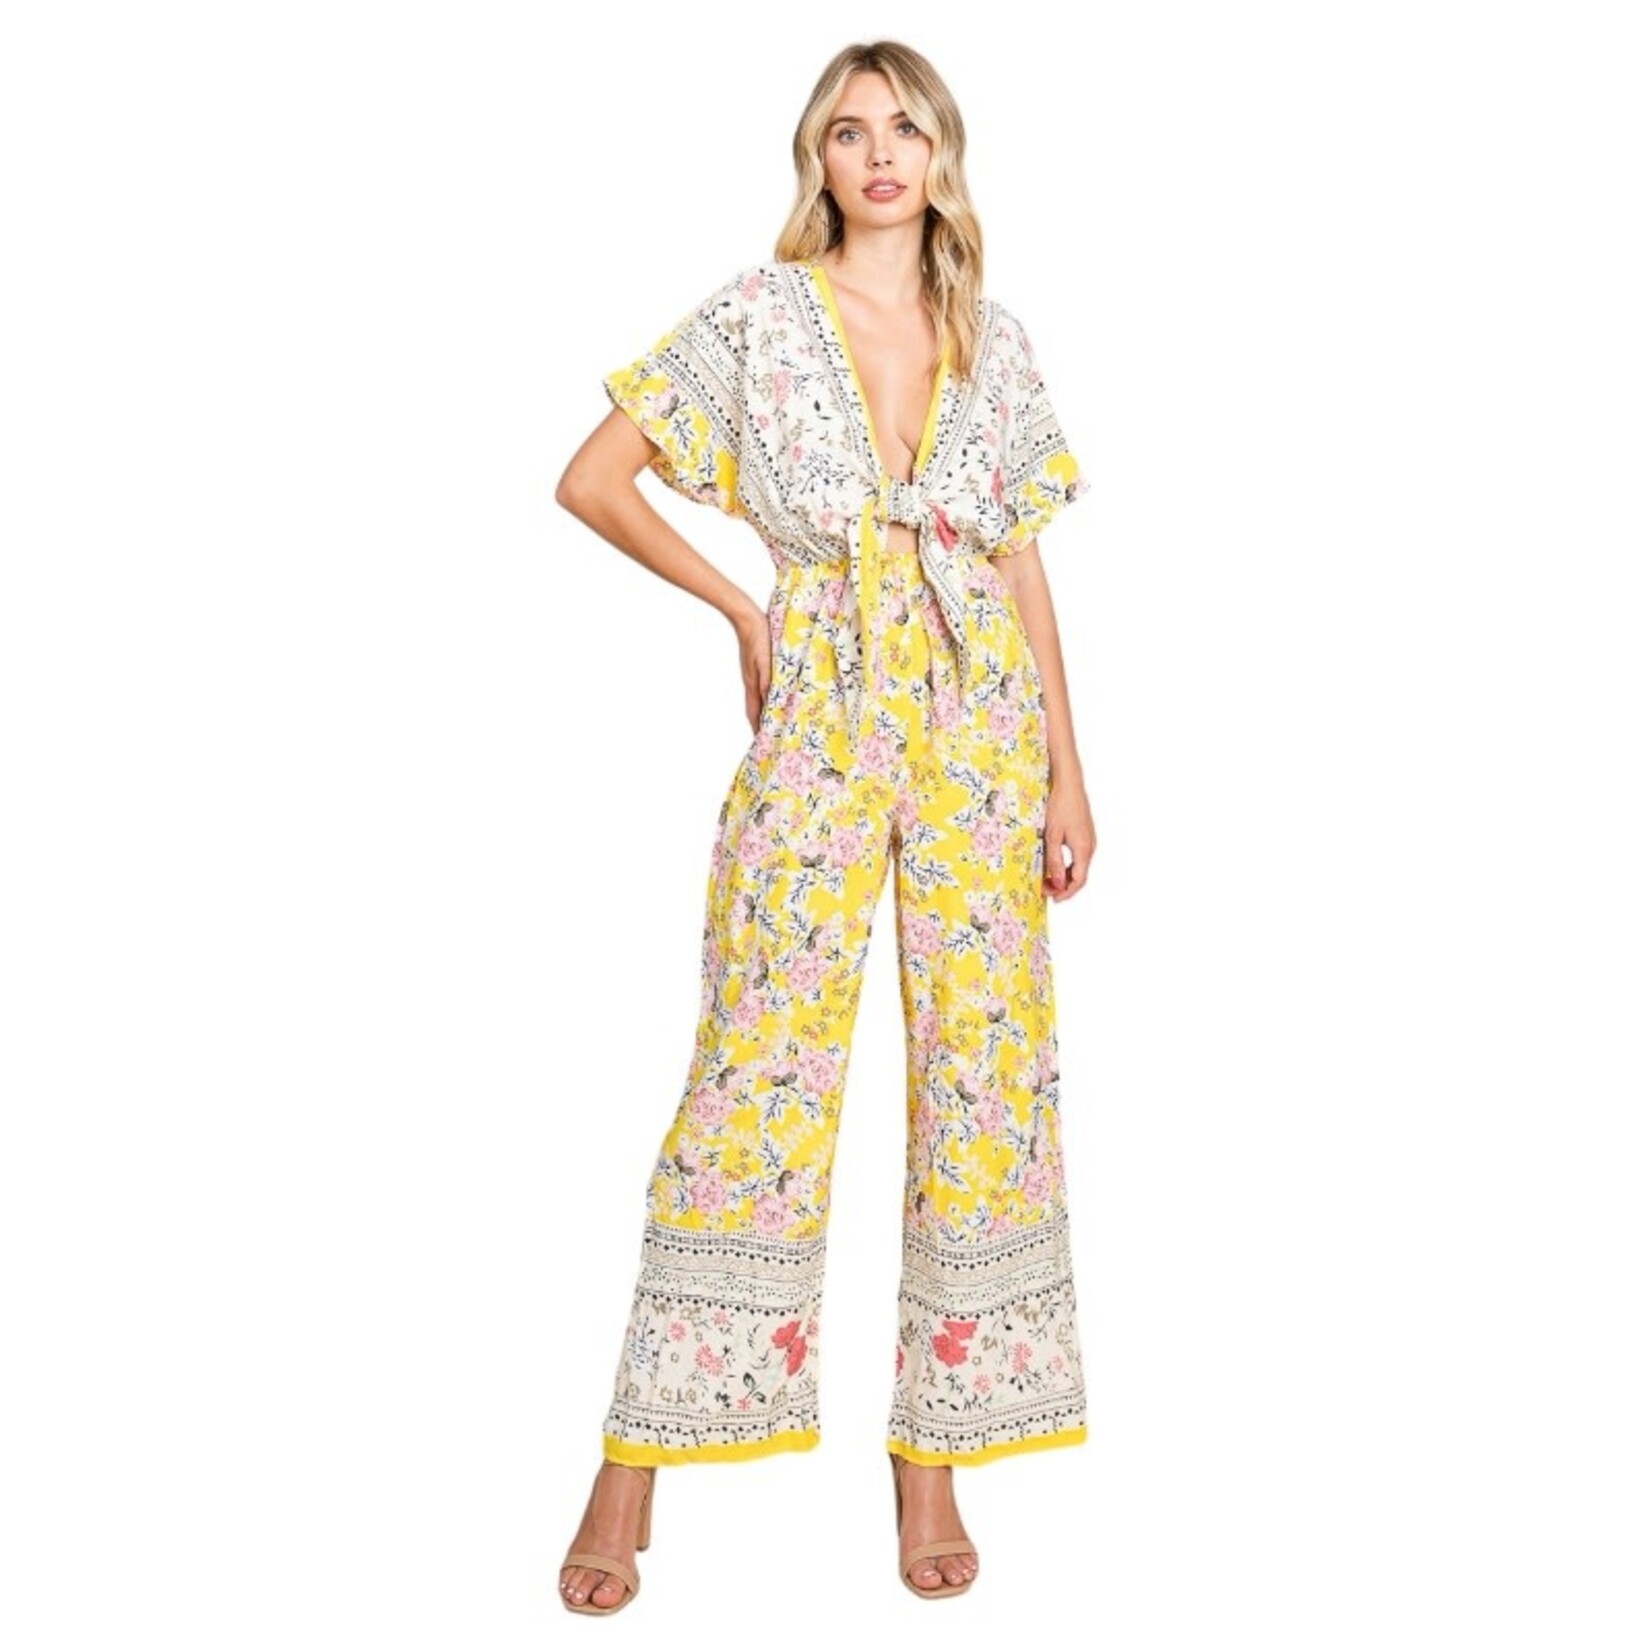 COLLECTIVE RACK COLLECTIVE RACK FLORAL PRINT JUMPSUIT WITH TIE FRONT J51711W